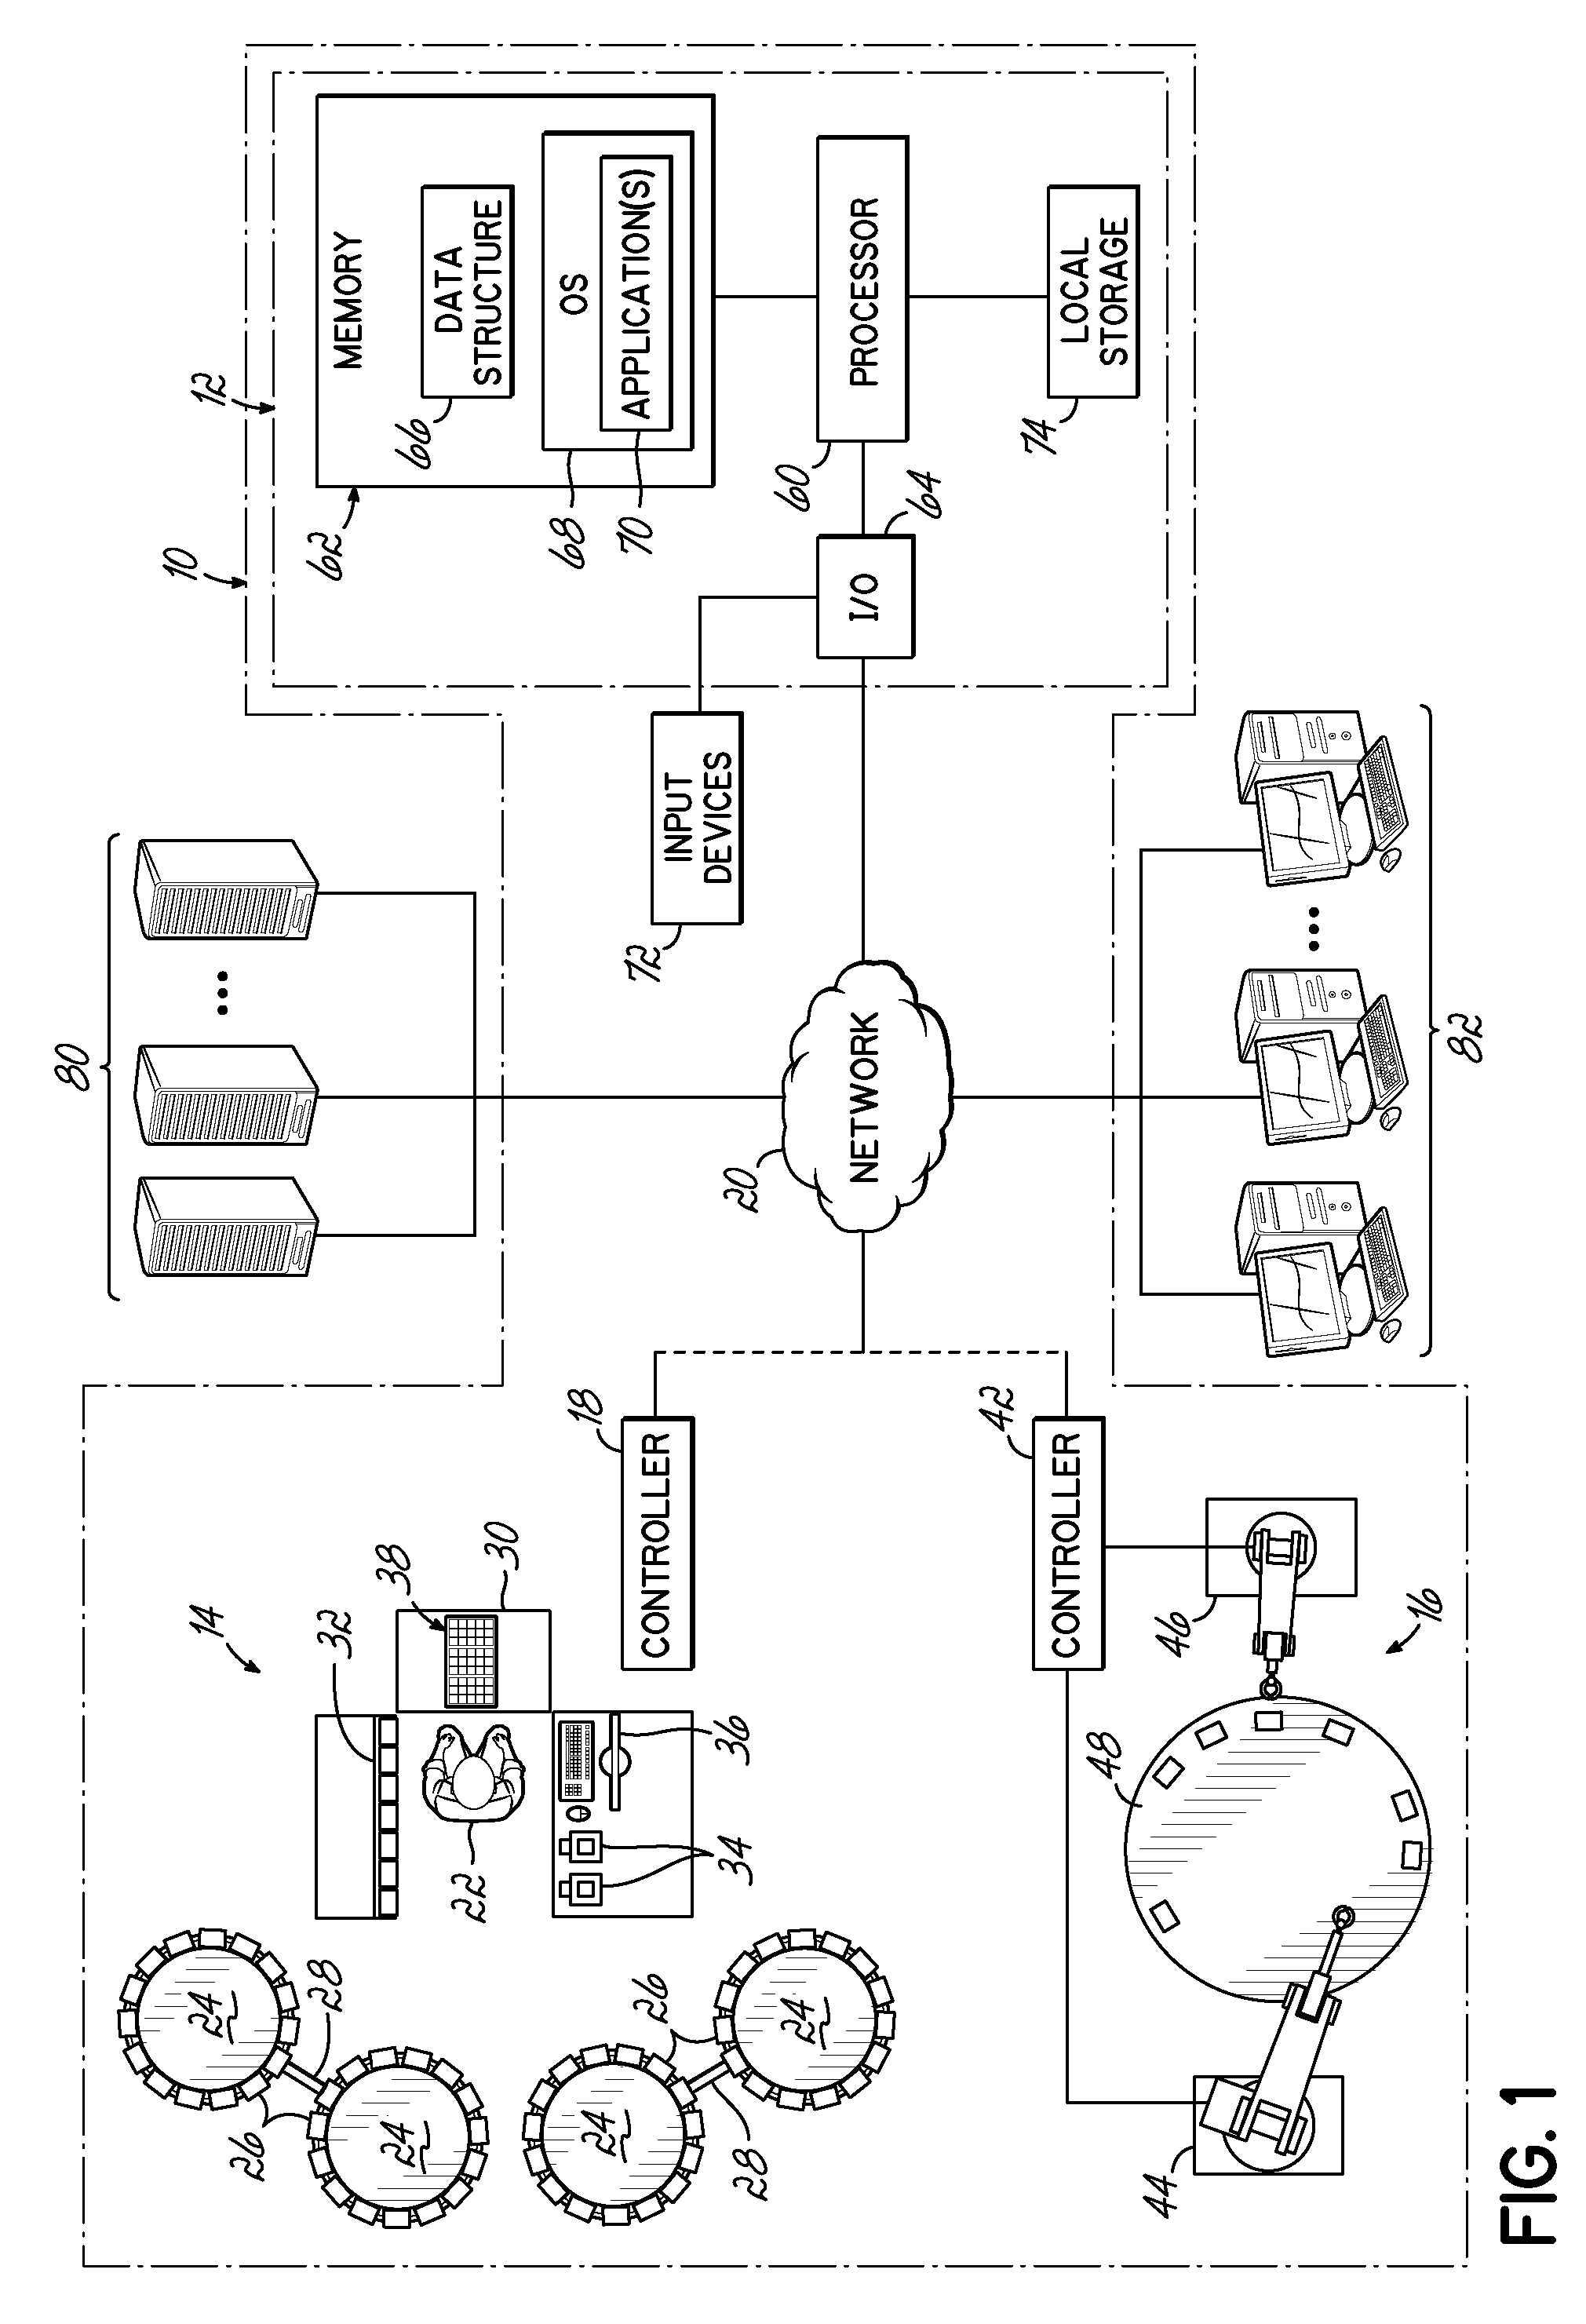 Methods and apparatus for filling of packagings with medications